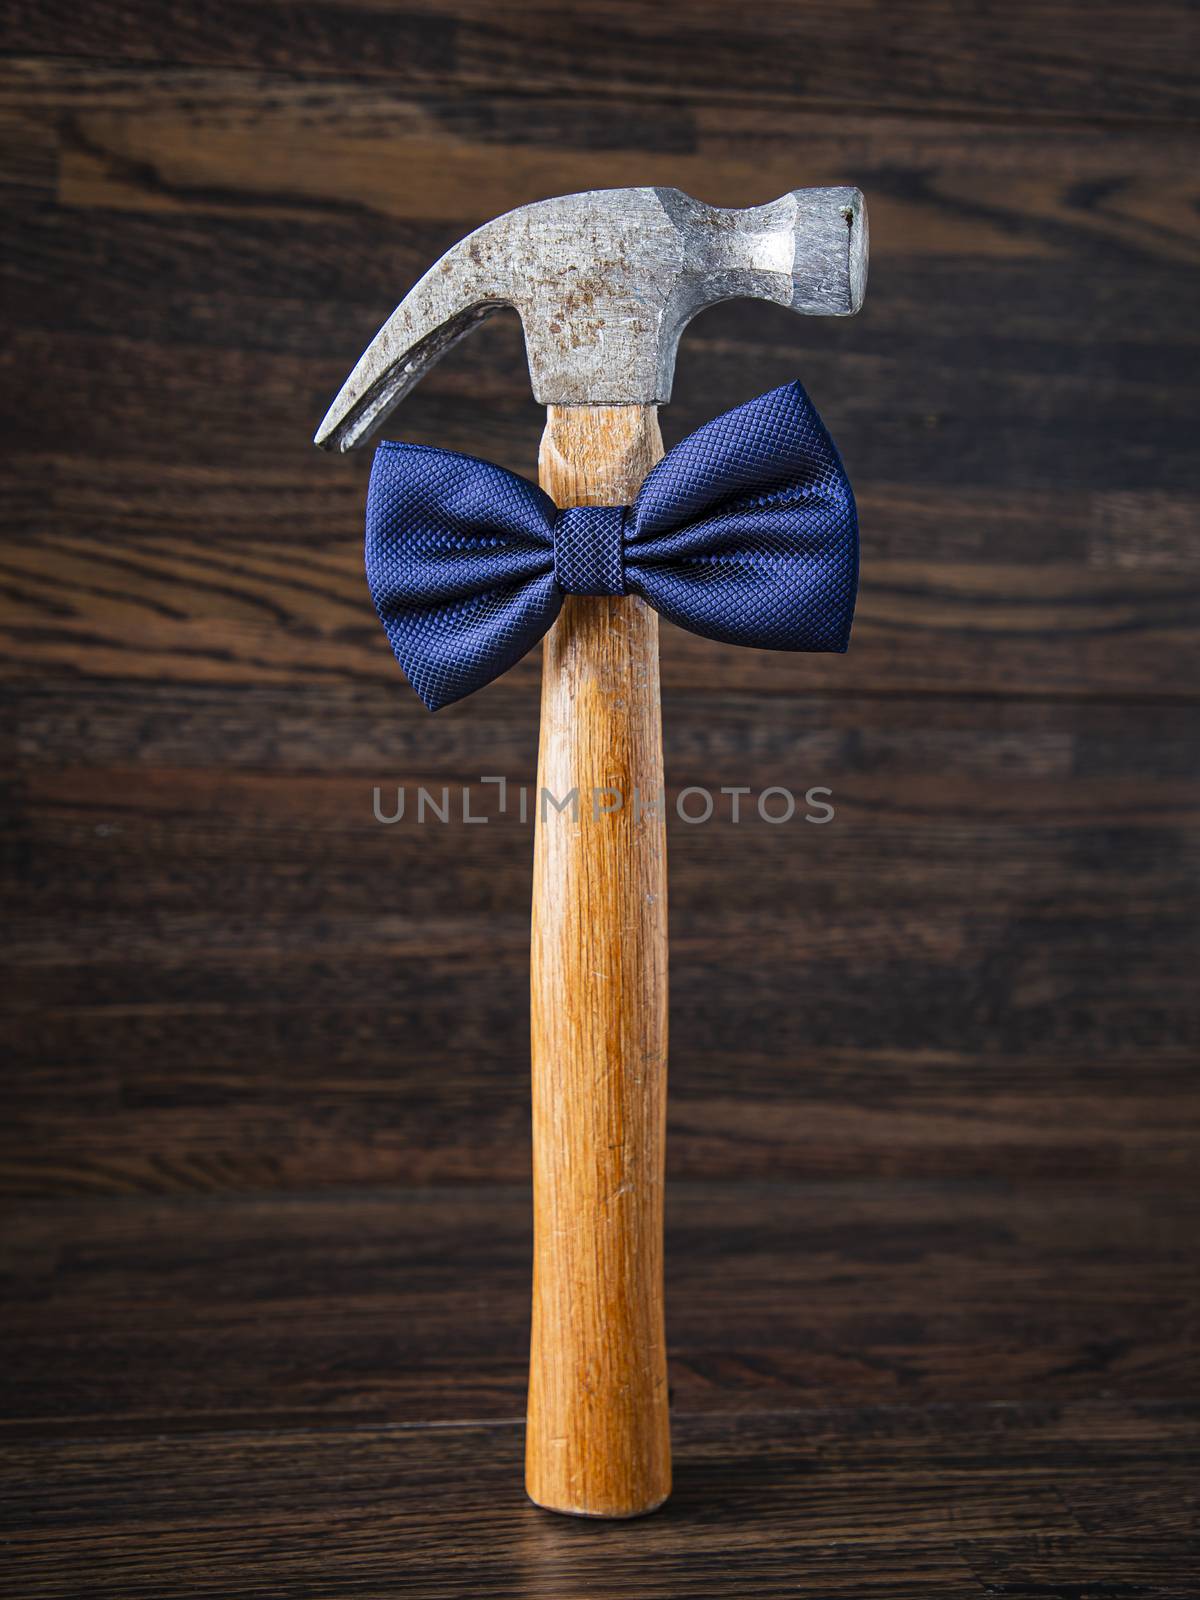 weathered down hammer wearing a blue bow tie against a hard wood floor backgound